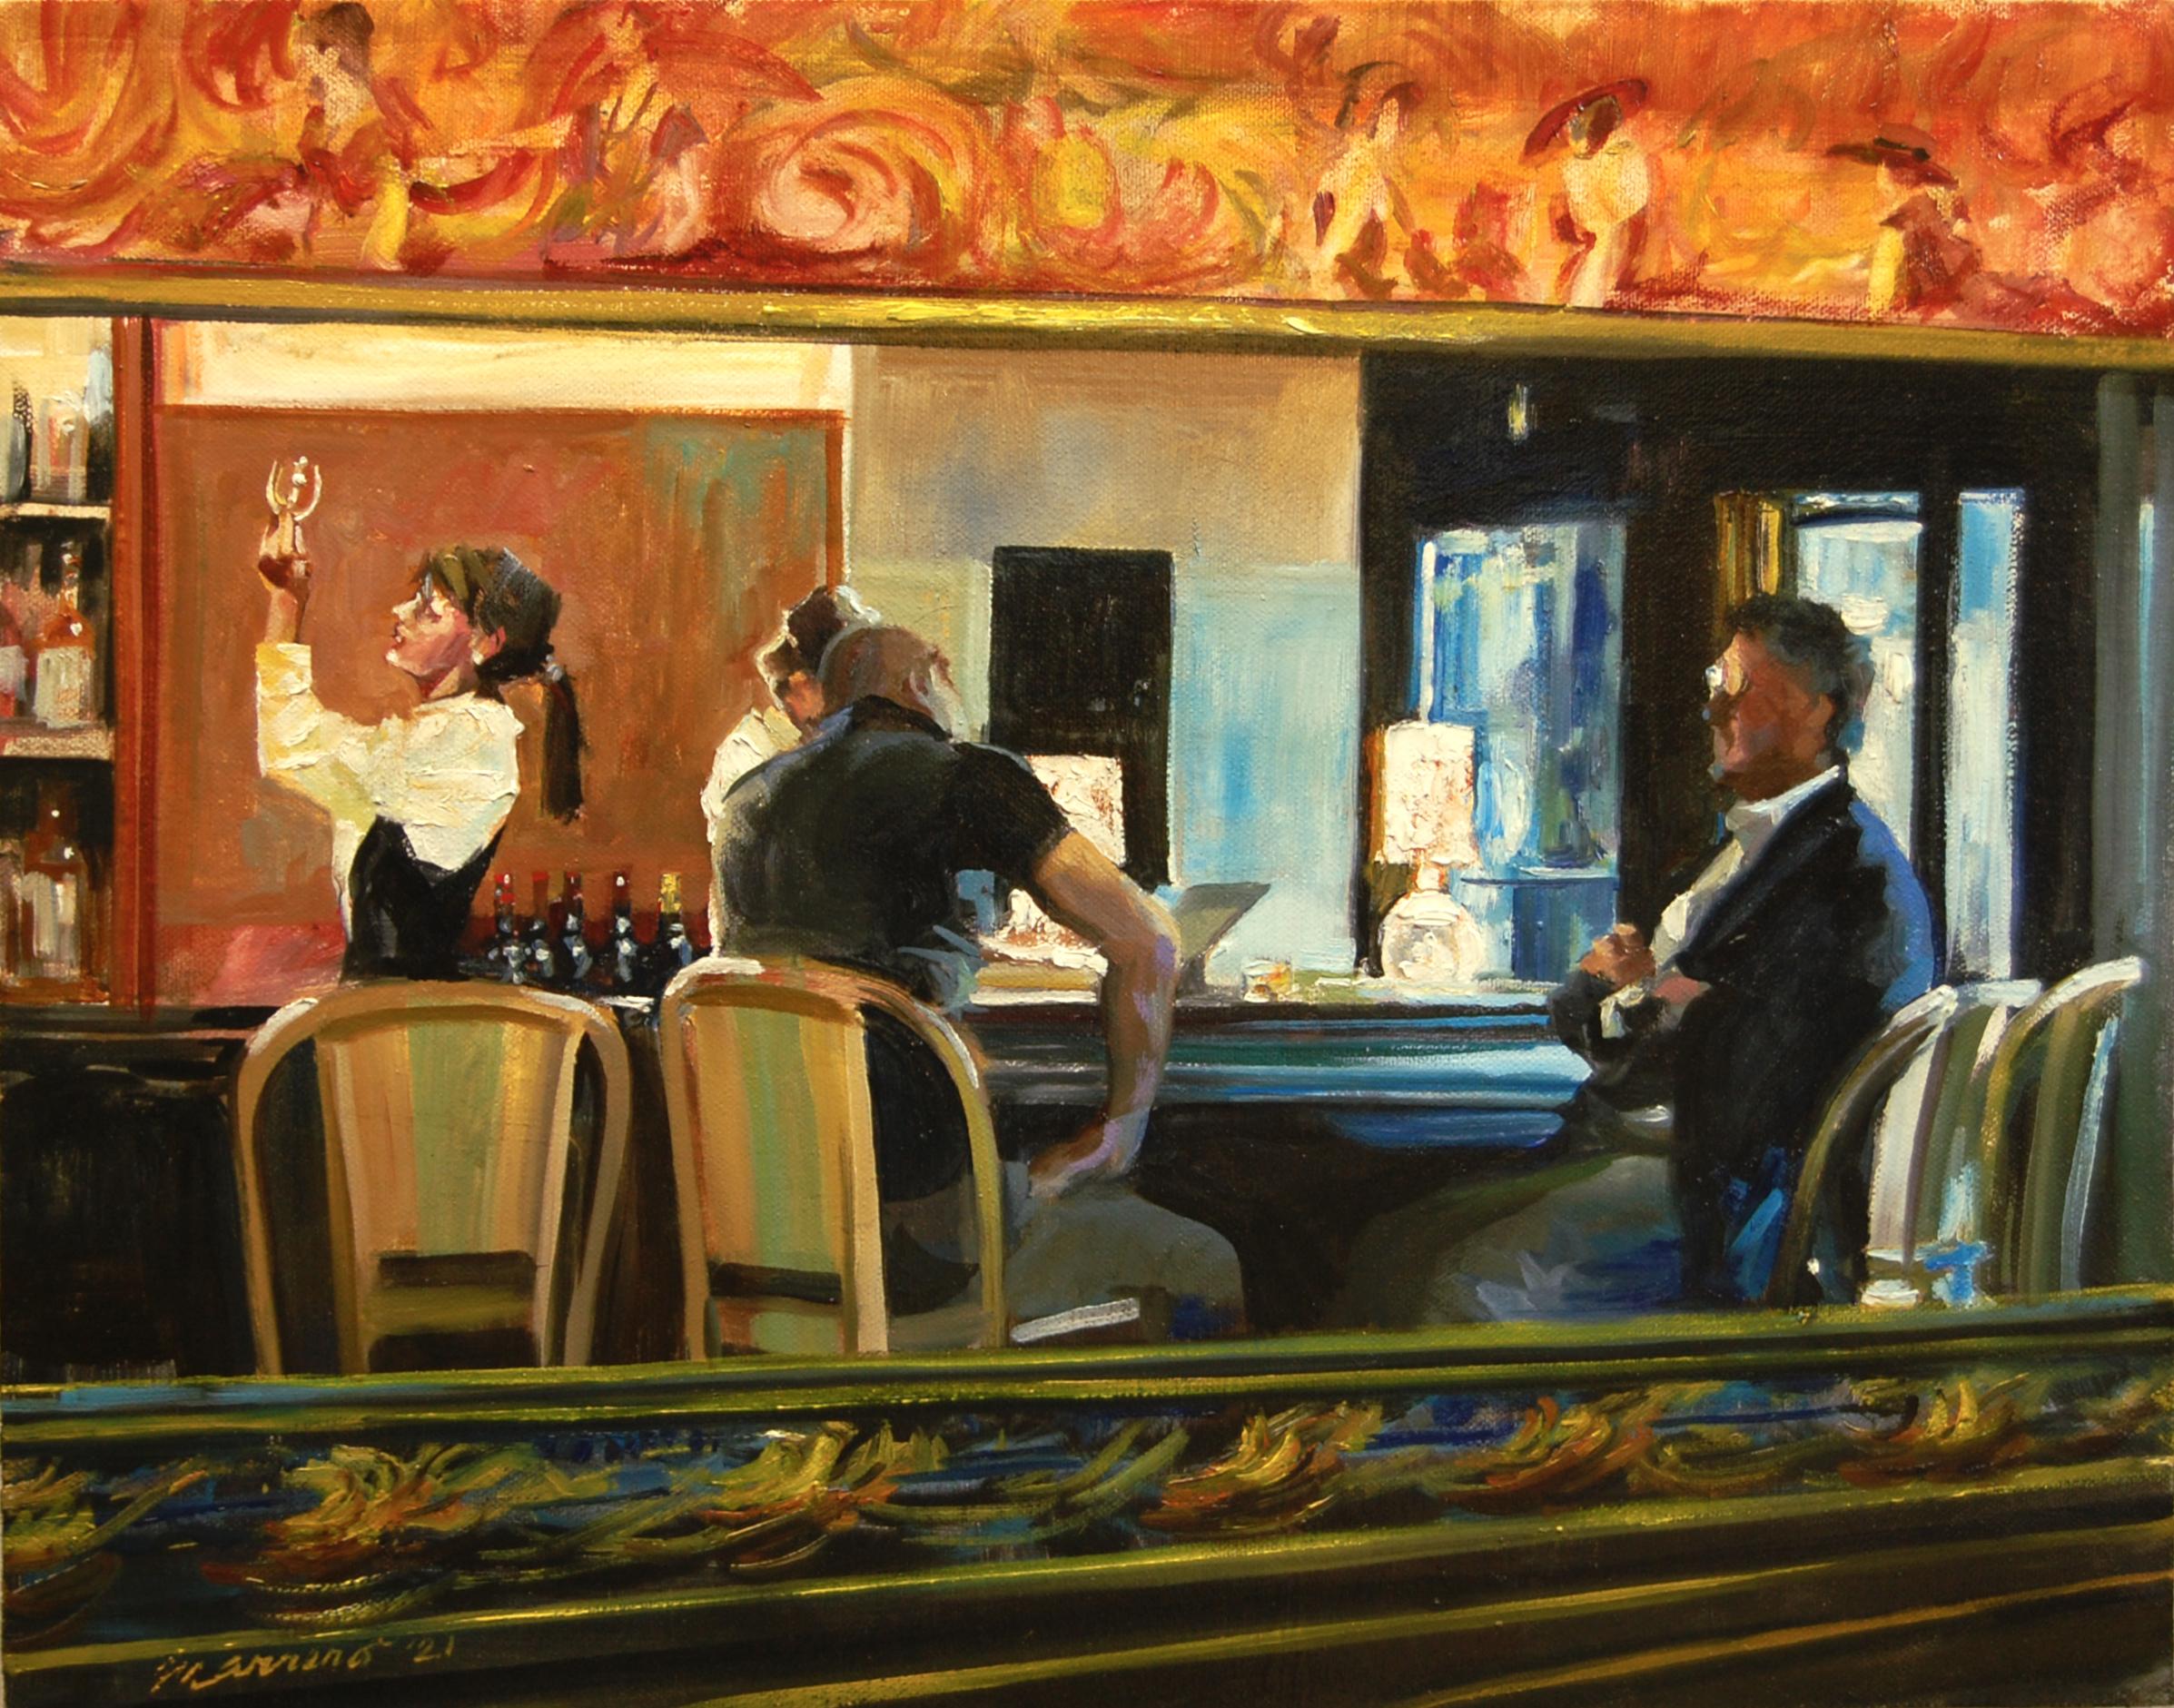 <p>Artist Comments<br>Artist Onelio Marrero painted this piece based on sketches he made while waiting for a meal at a Back Bay Boston Bistro. "Several of the figures are from the sketches," says Onelio. "I added some characters based on other